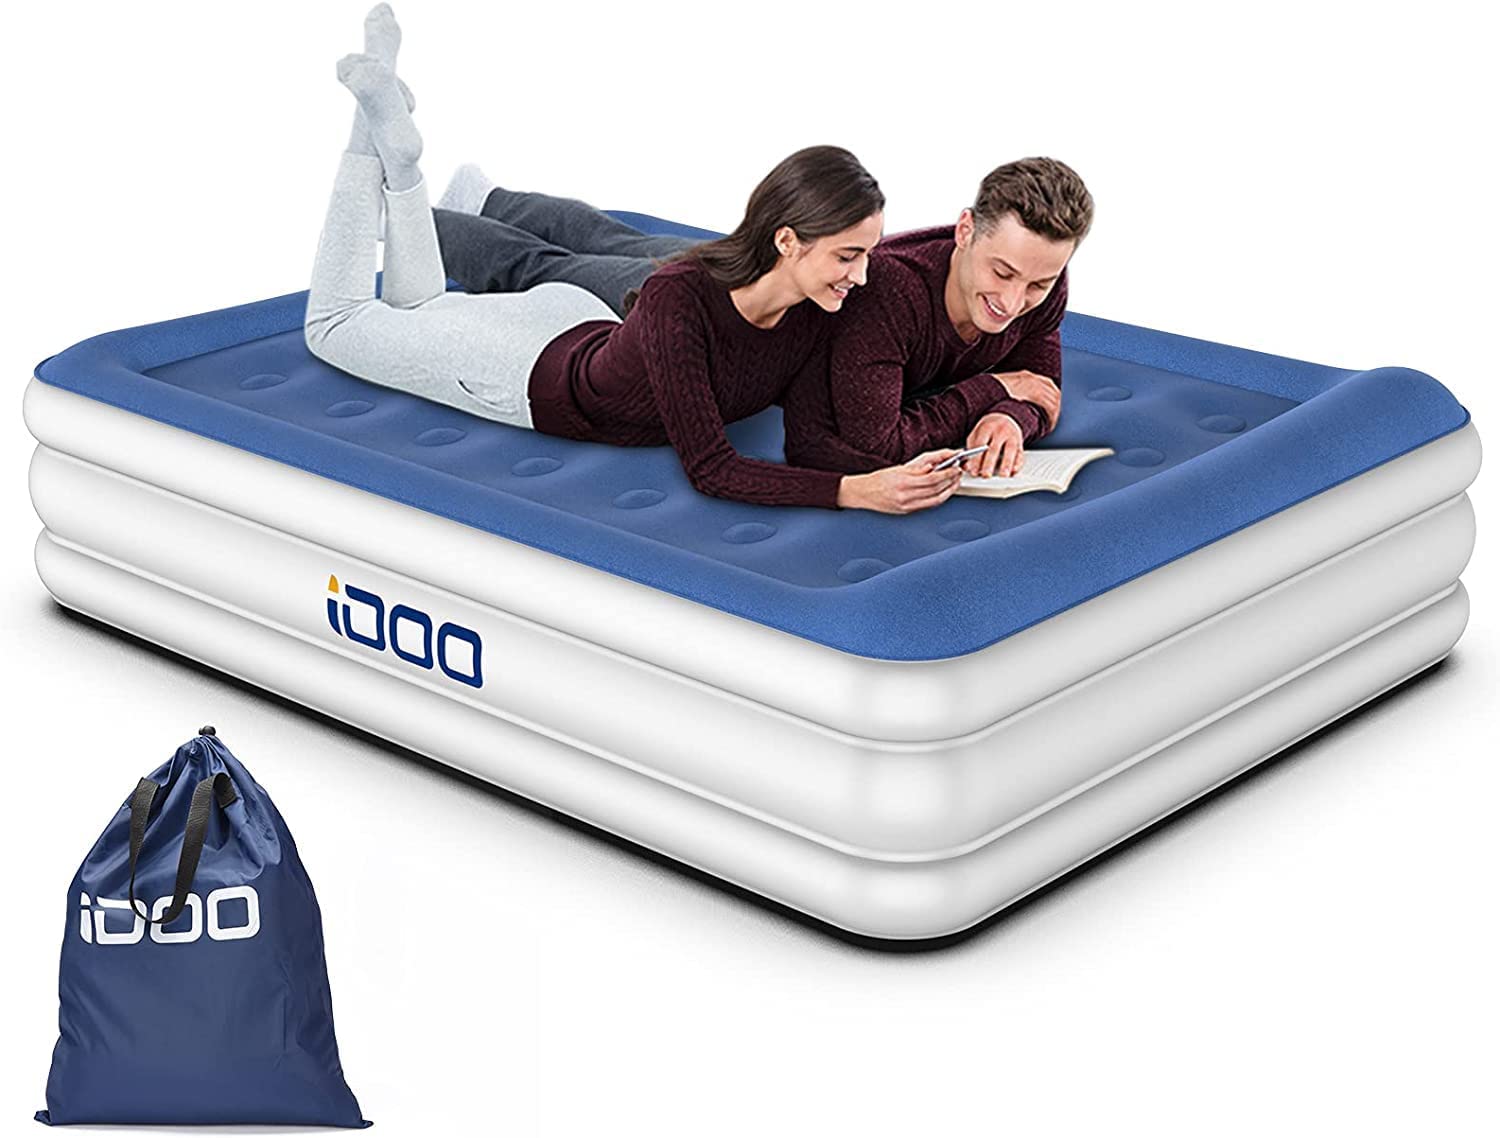 iDOO Inflatable Mattress with Integrated Pillow and Pump